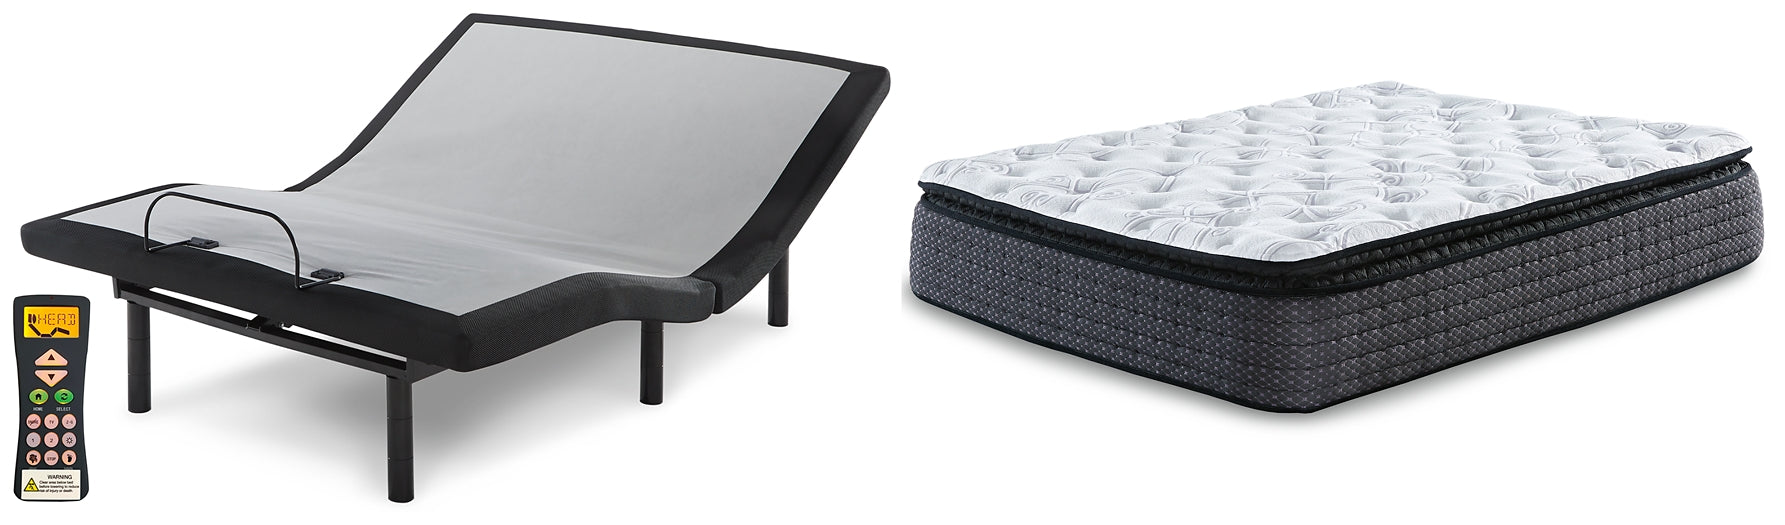 Limited Edition Pillowtop Mattress with Adjustable Base Sierra Sleep® by Ashley